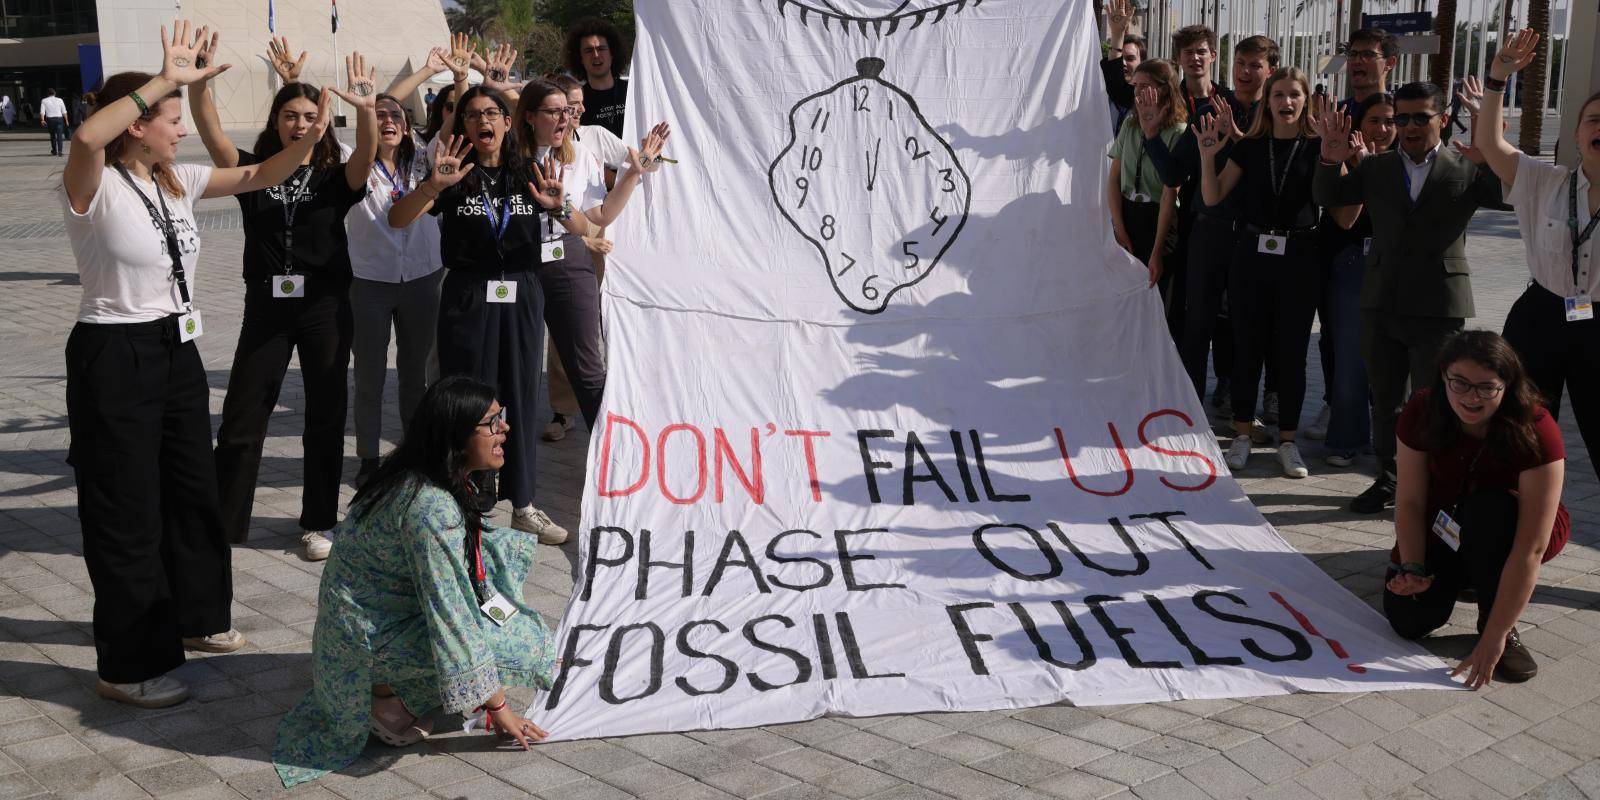 To phase out or phase down? Why the debate on fossil fuels misses key point